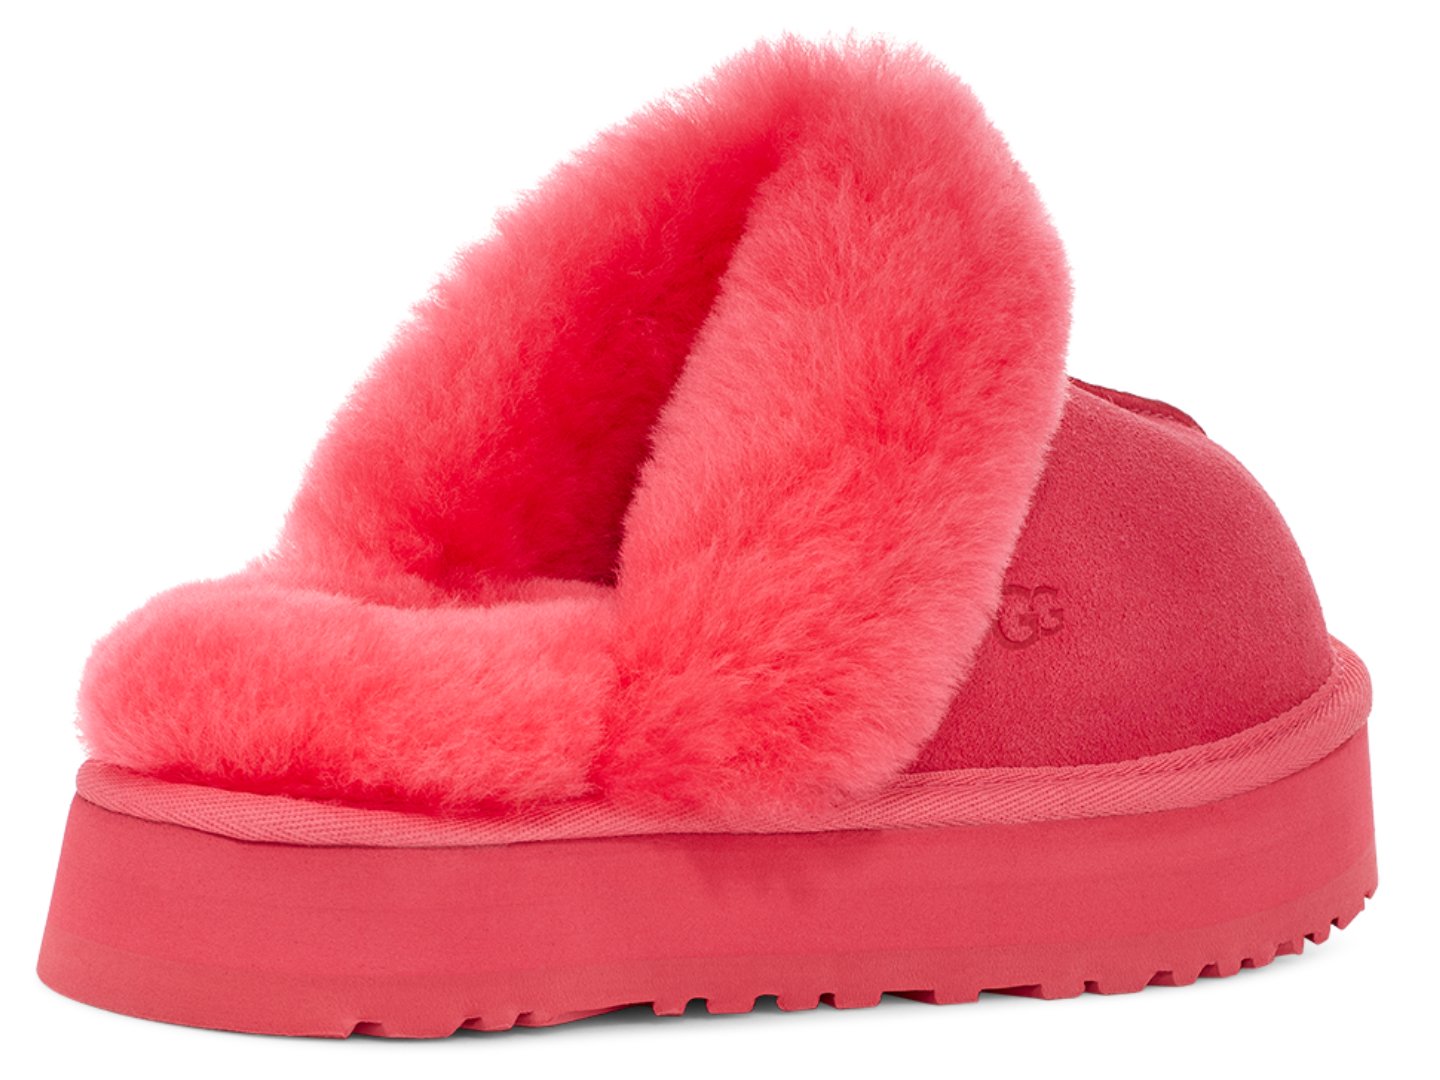 Ugg: Disquette in Pink Glow - J. Cole Shoes